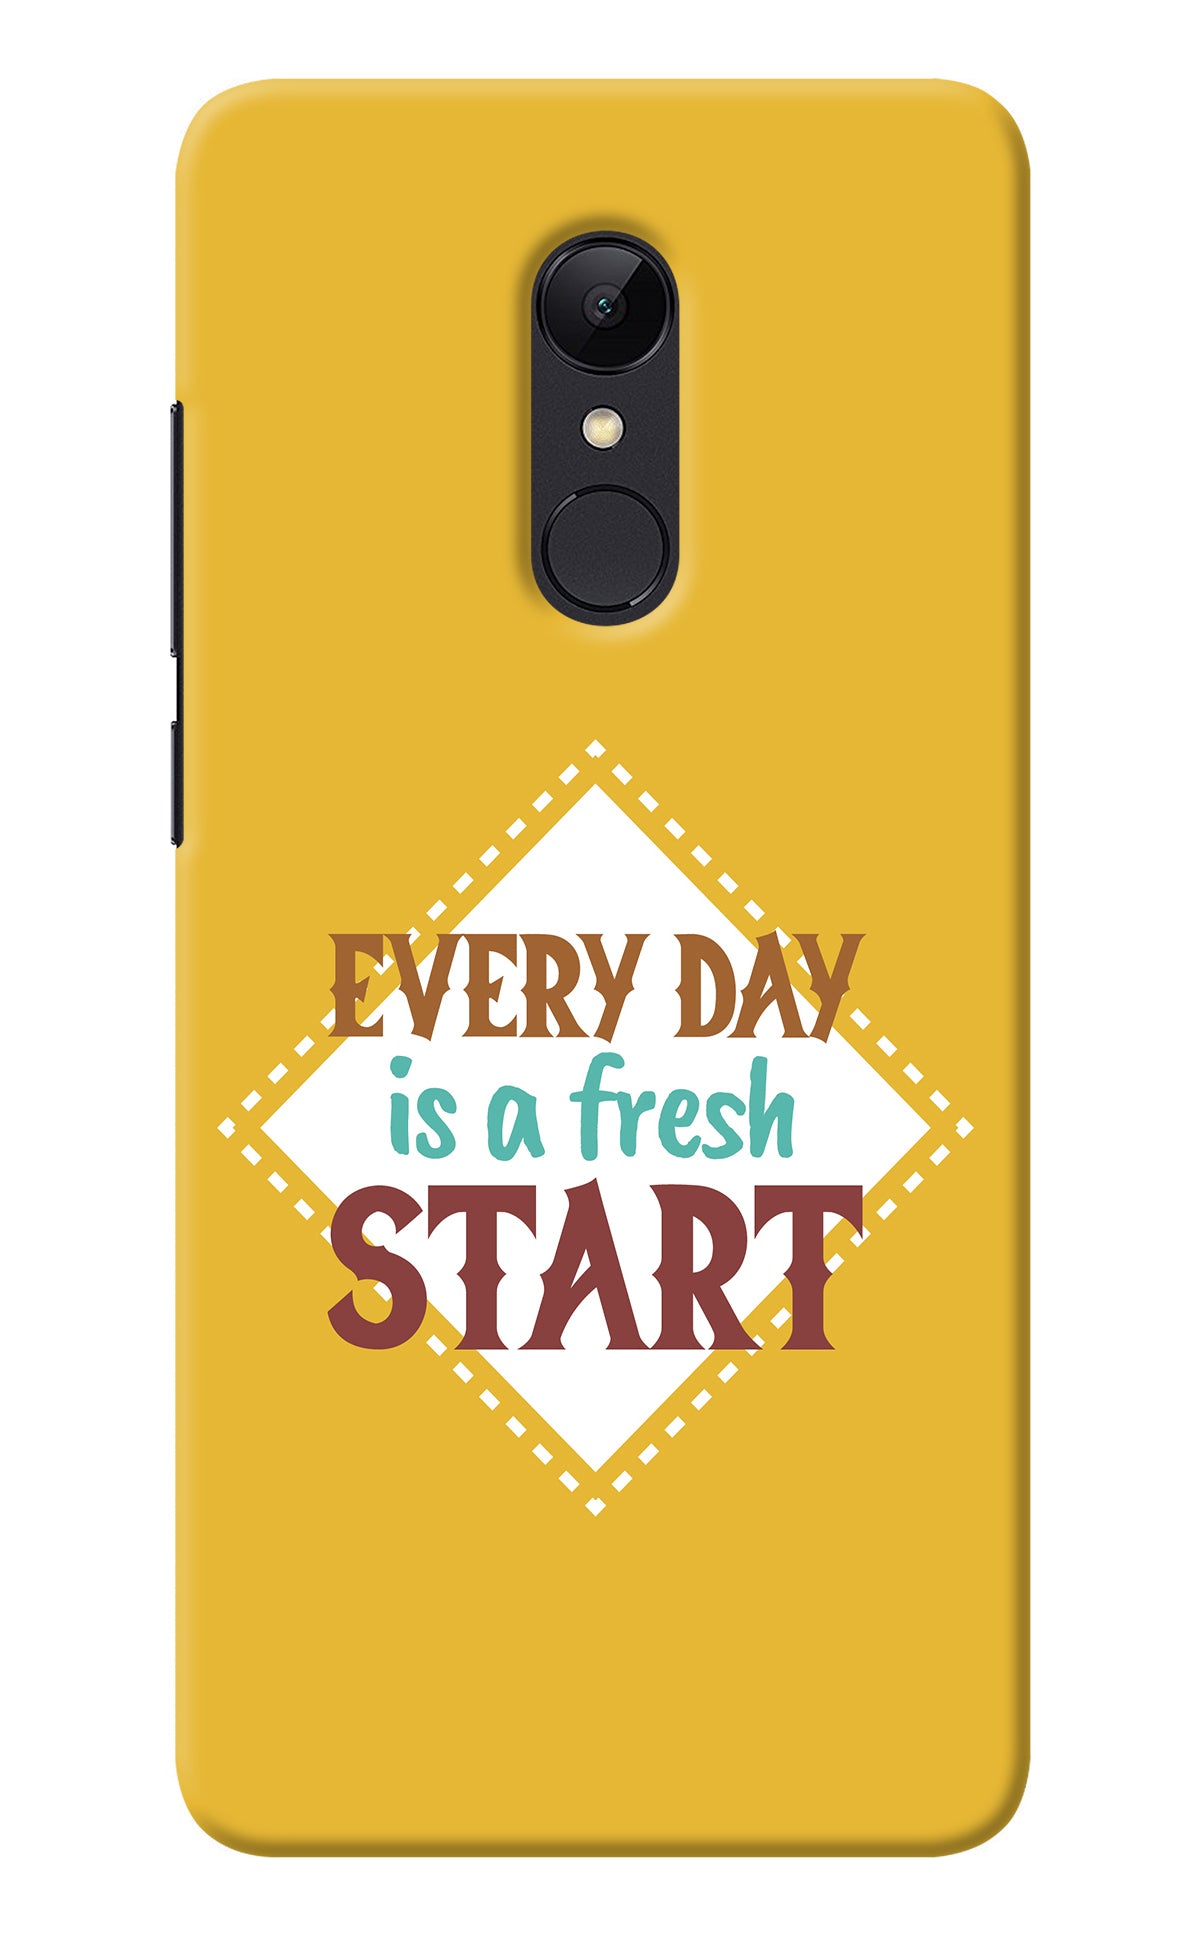 Every day is a Fresh Start Redmi Note 4 Back Cover